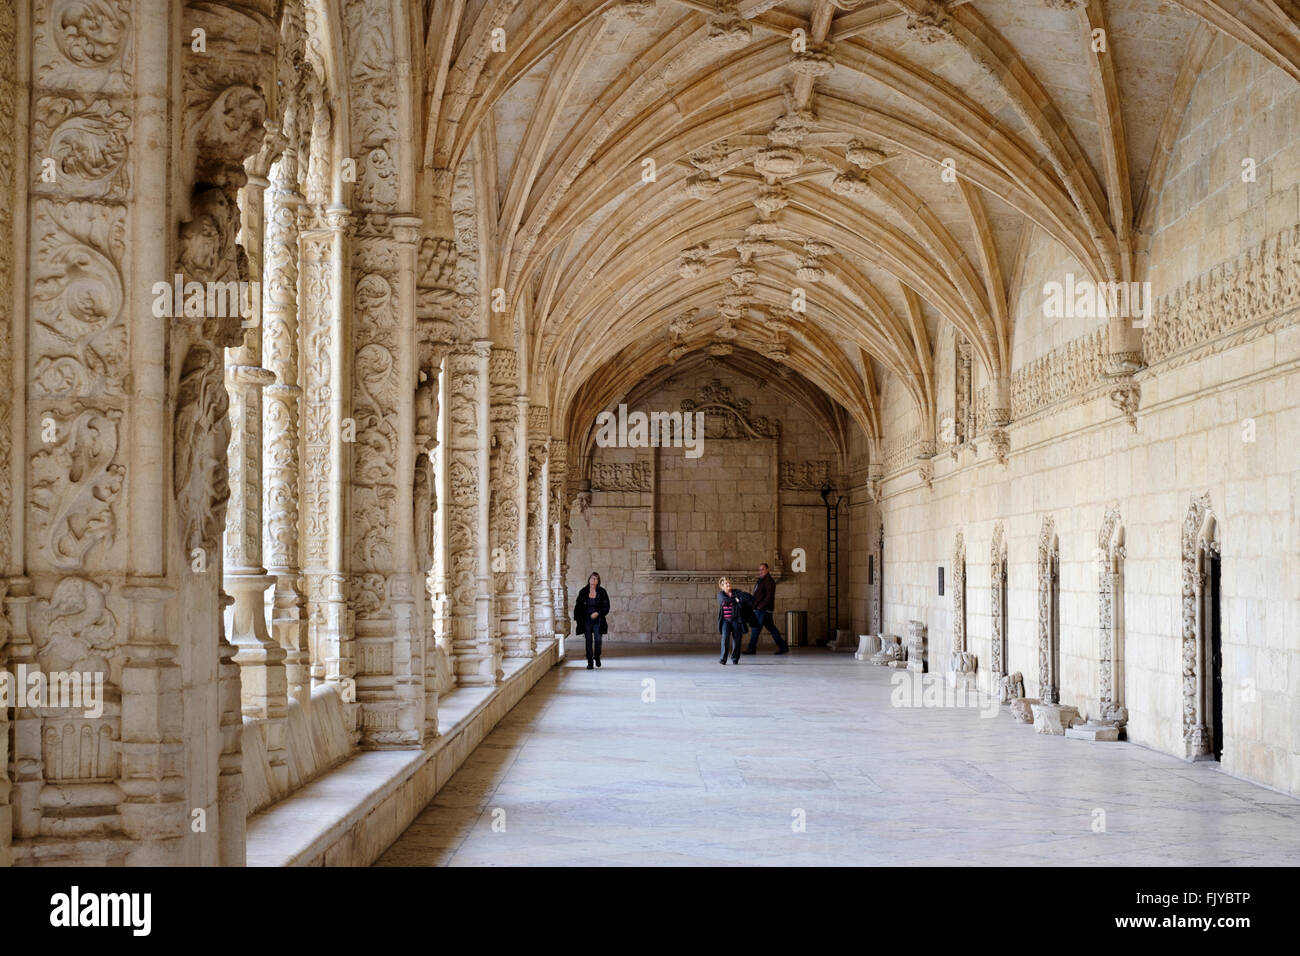 Portugal, Lisbon: Tourists in the medieval cloister of Jeronimos Monastery in Belém Stock Photo